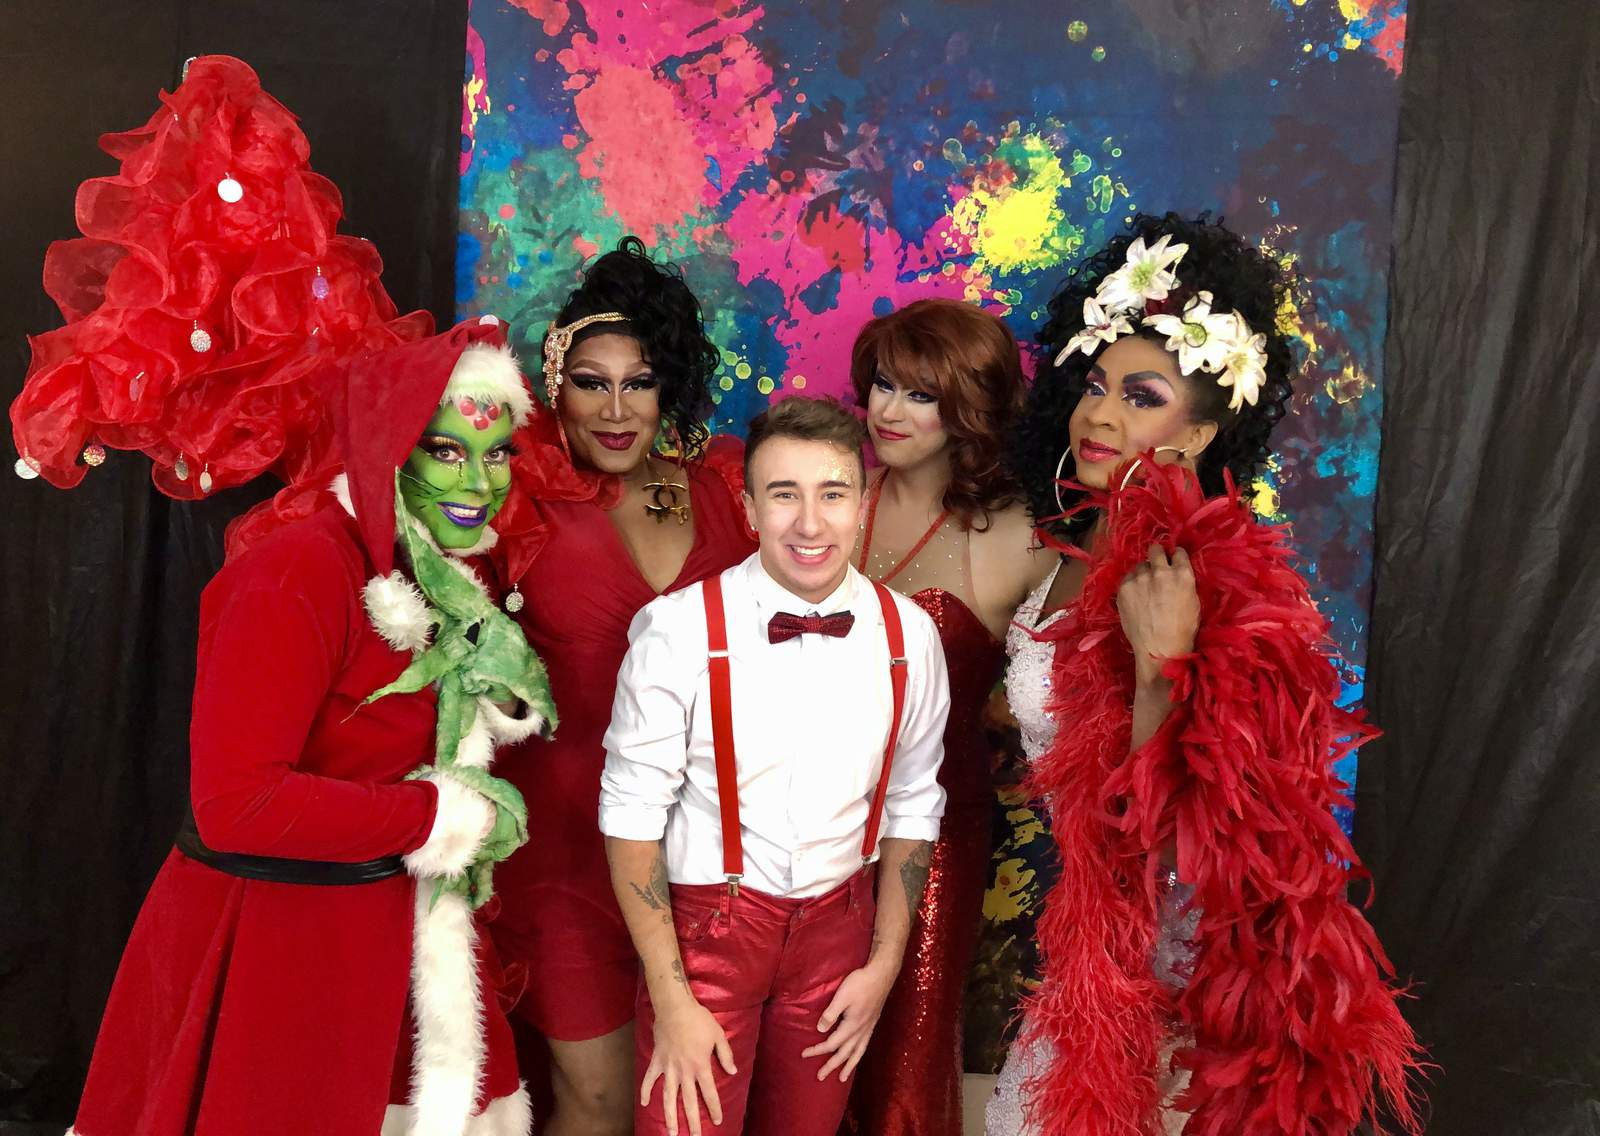 Boylesque to host New Year’s Eve fundraiser for frontline workers, small businesses